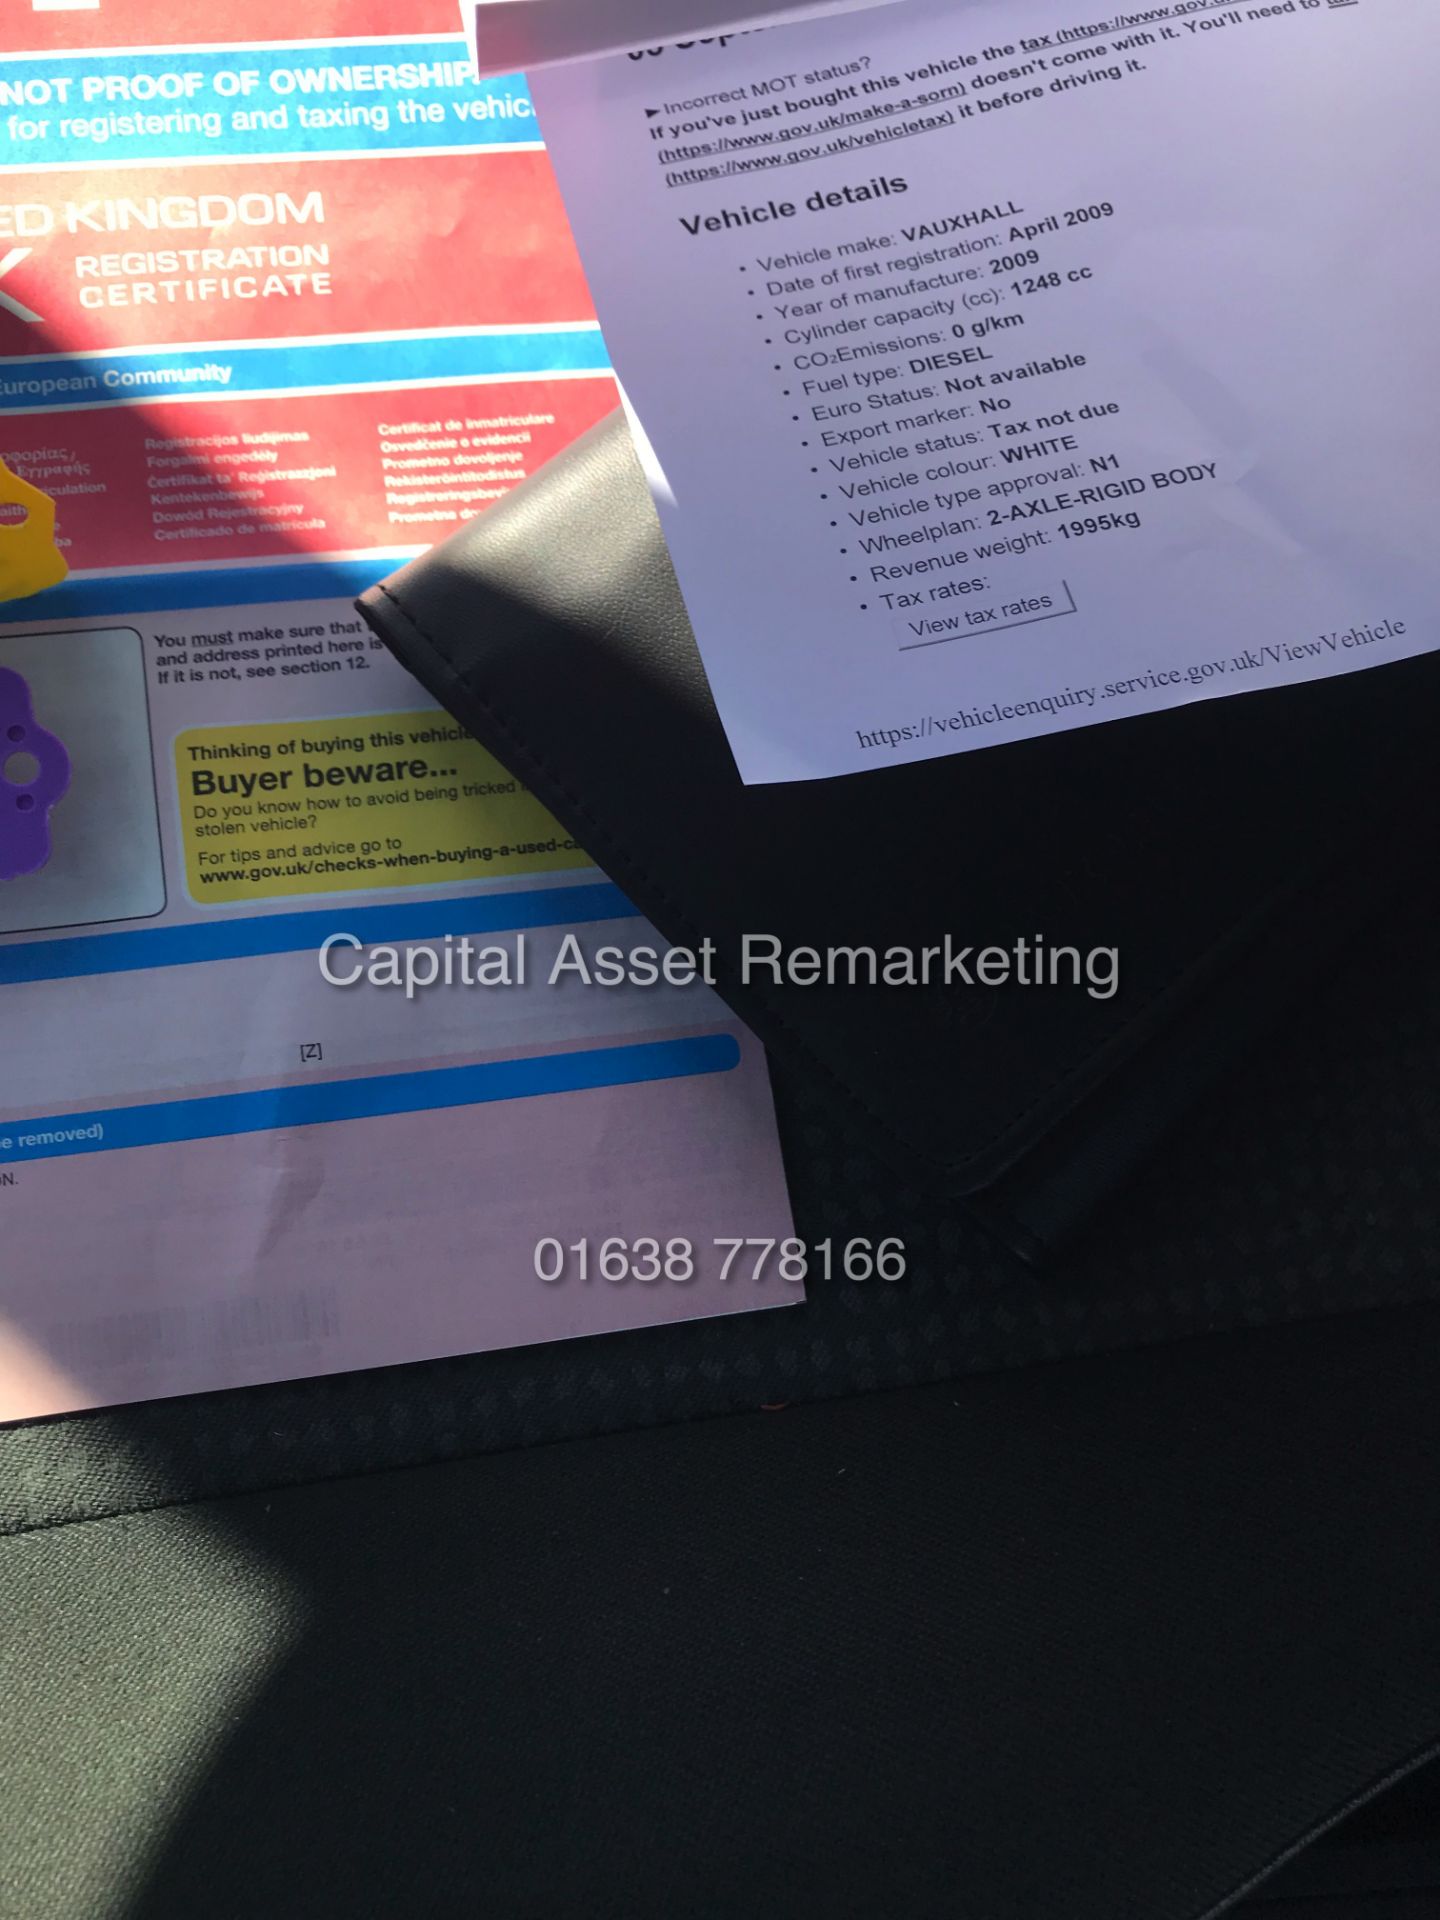 ON SALE VAUXHALL COMBO 2000 CDTI (09 REG) 1 OWNER FSH *AIR CON* SIDE LOADING DOOR - Image 18 of 19